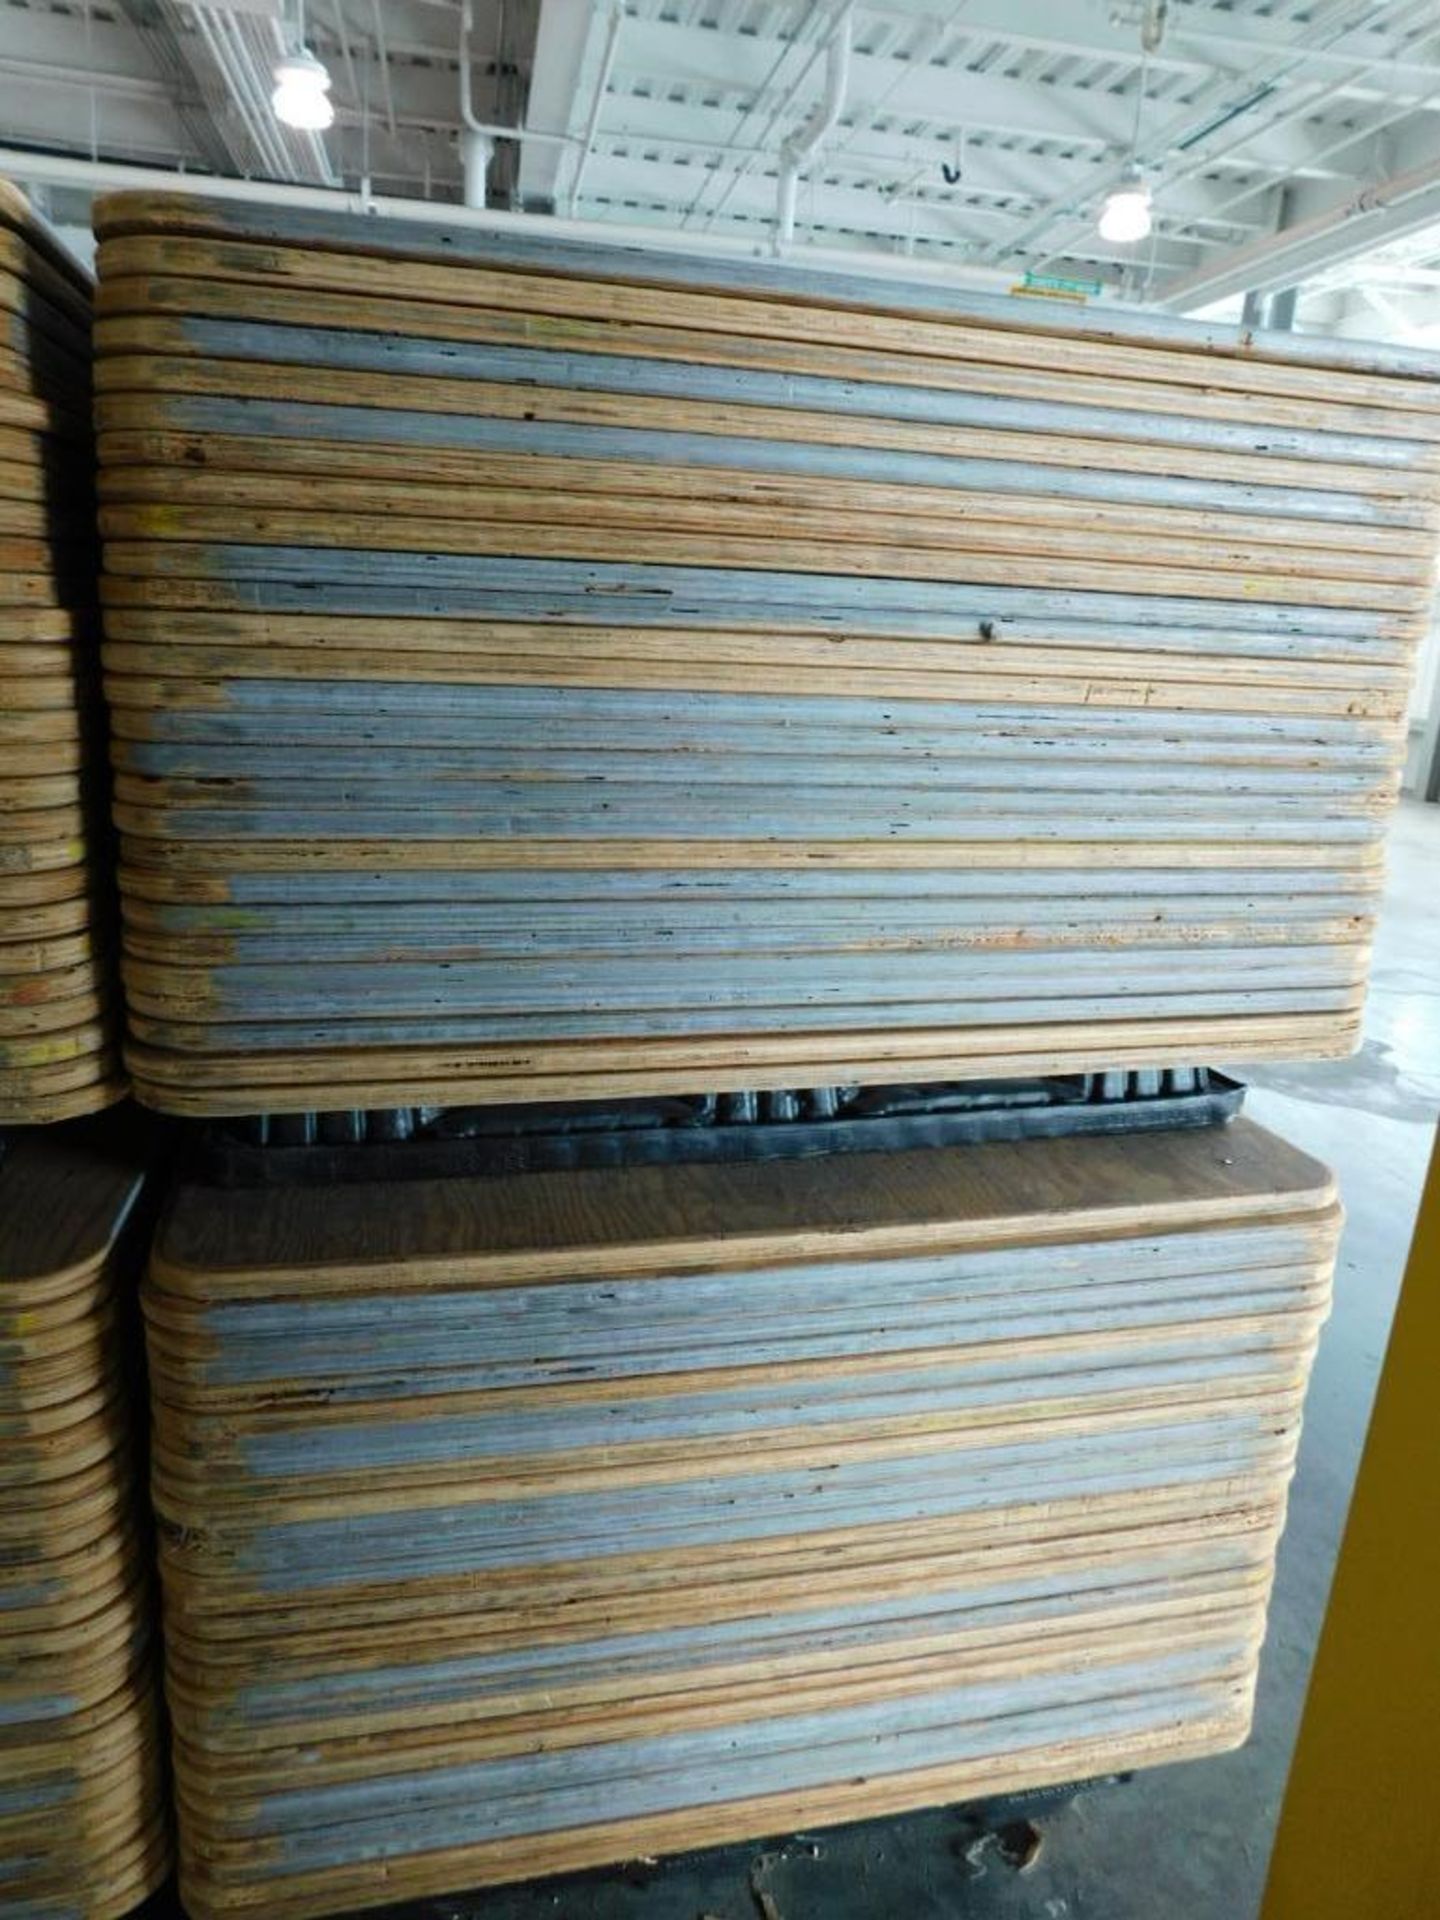 LOT: Large Quantity of 50" x 50" Wood Paper Roll Pallets on (12) Plastic Pallets (LOCATION: IN MAIL - Image 3 of 7